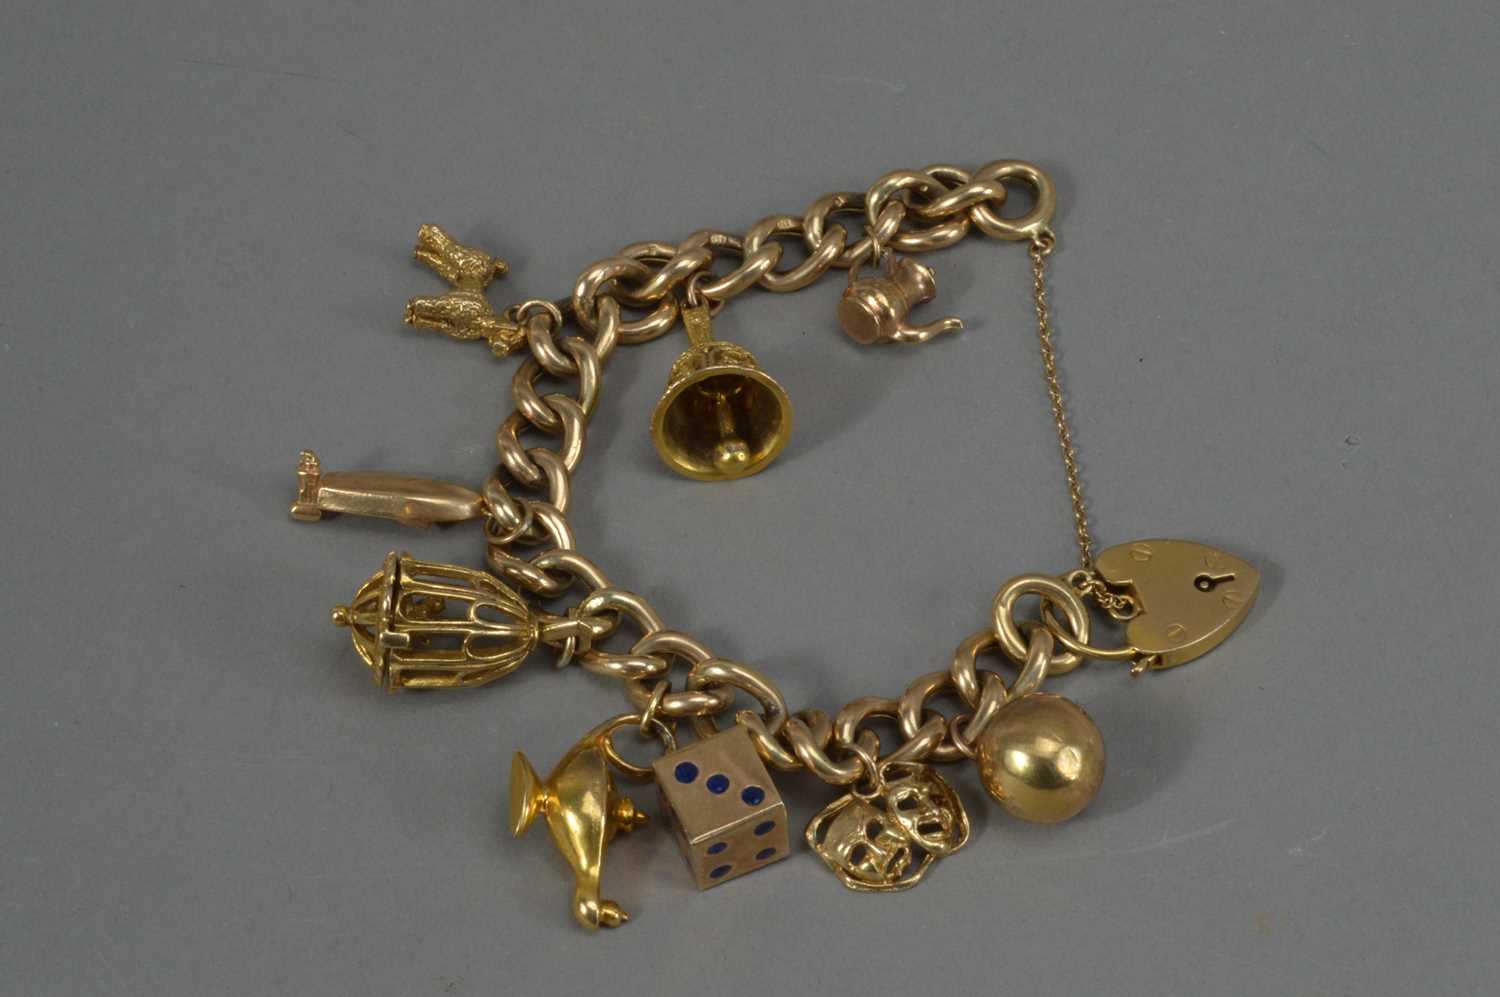 Lot 57 - A 9ct. Gold hollow curbed linked charm bracelet